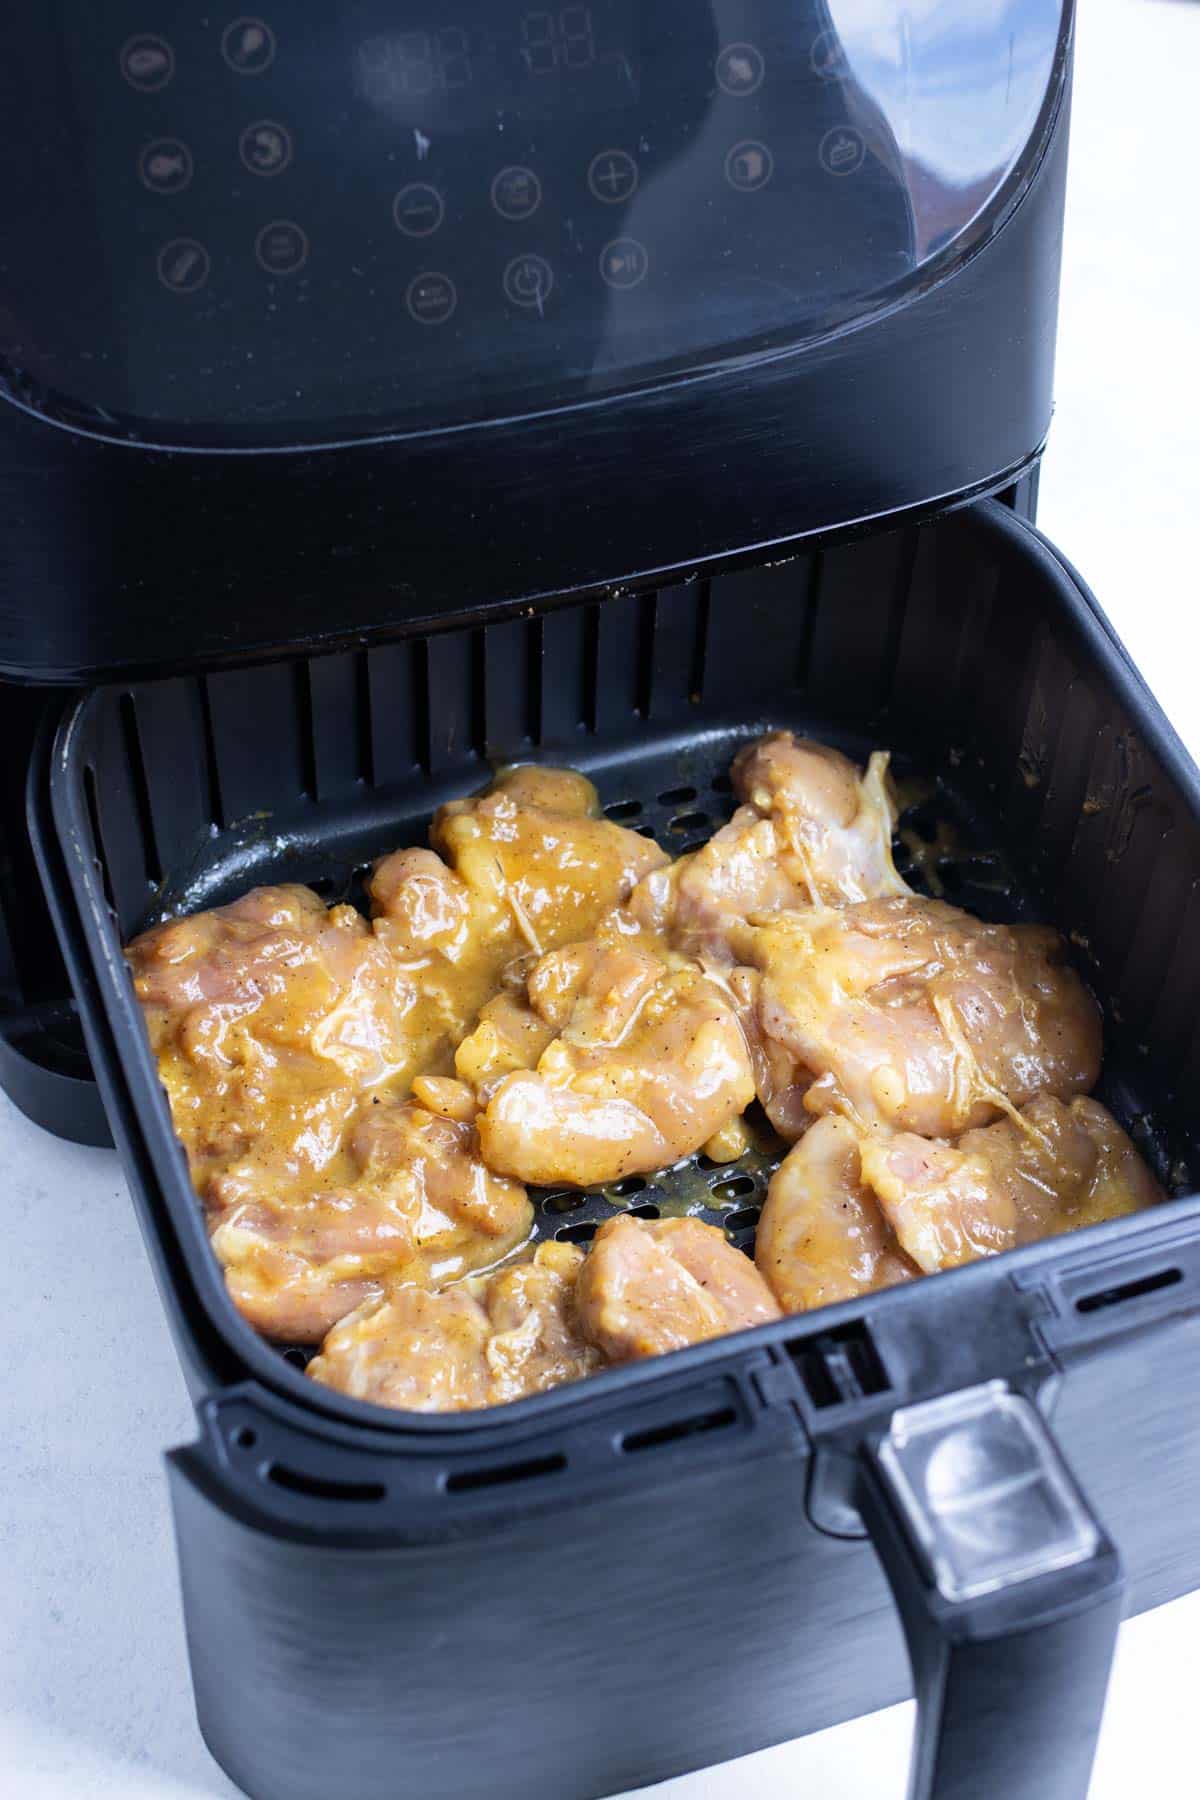 Chicken thighs are placed in the air fryer.